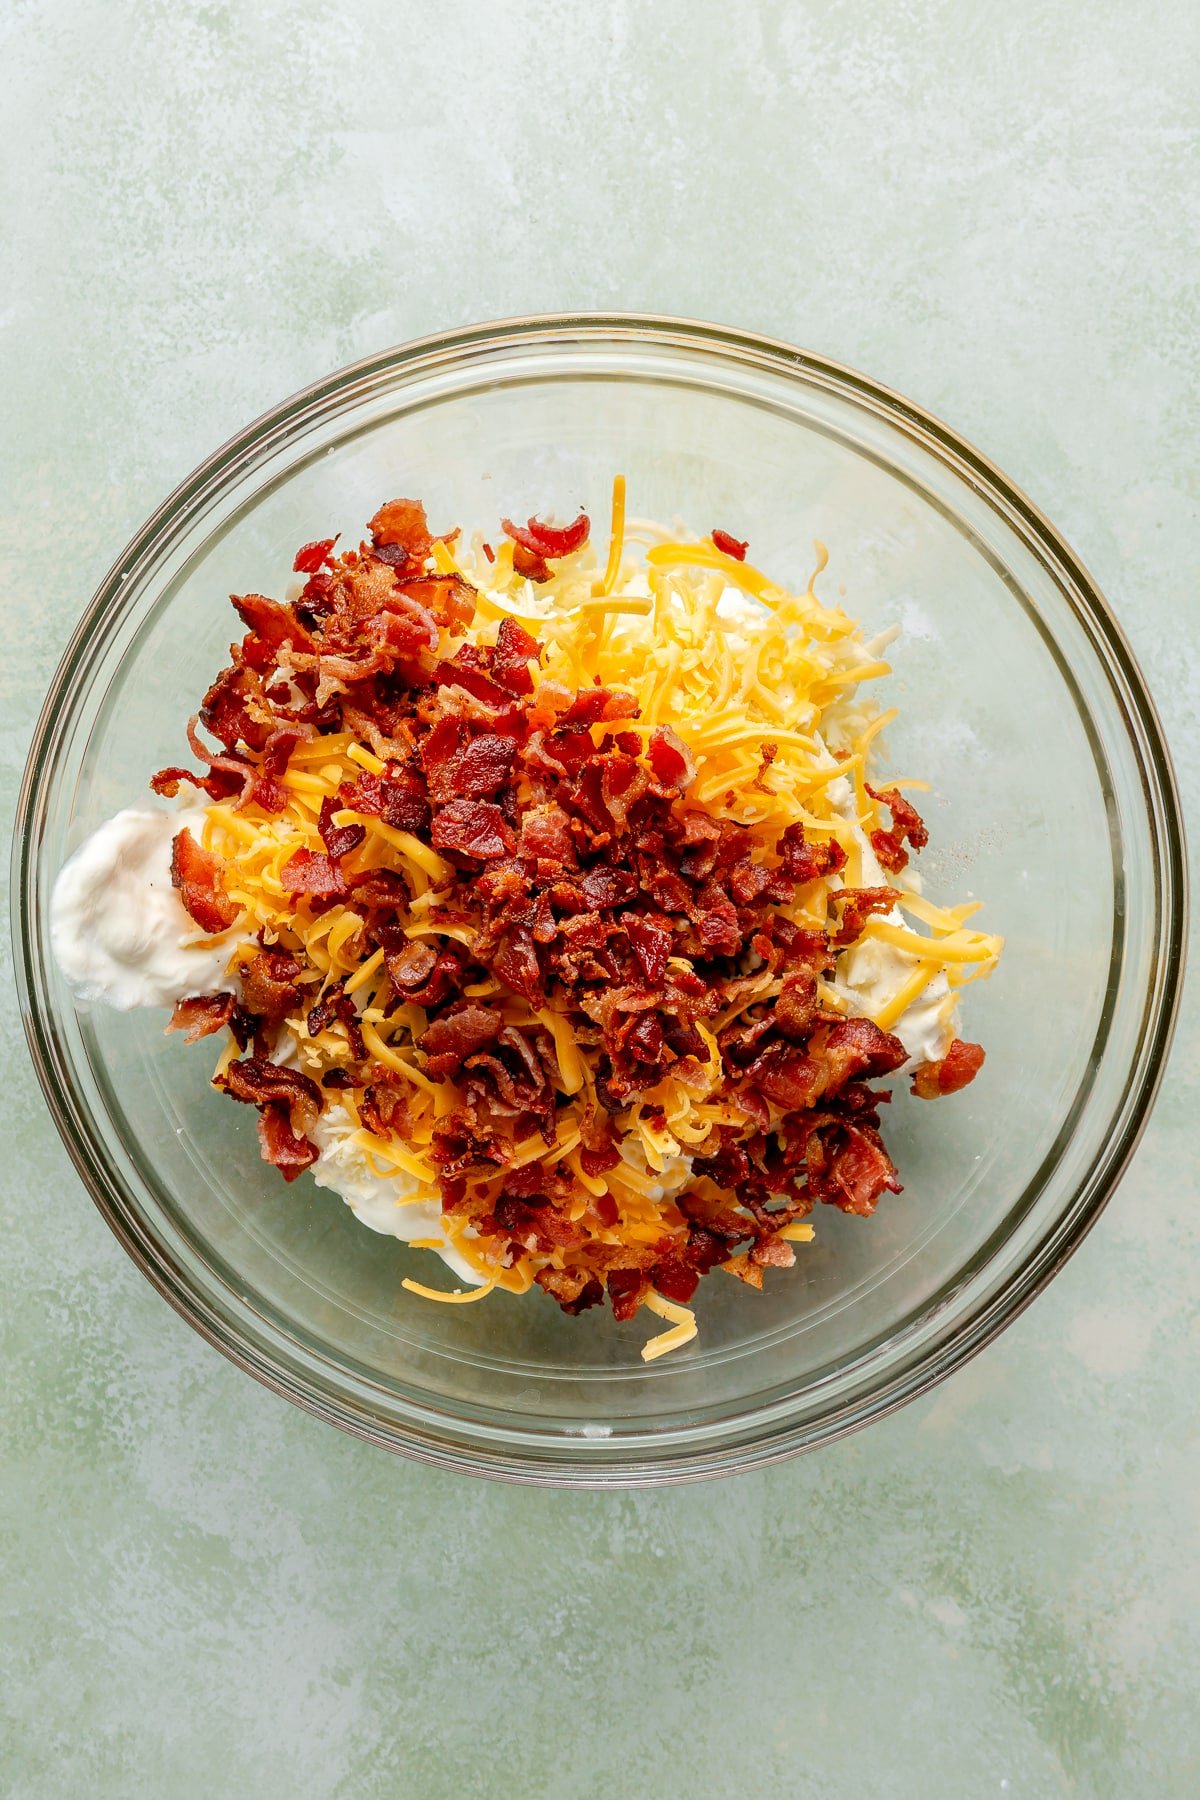 Cream cheese, shredded cheddar, and bacon pieces have been placed into a glass mixing bowl.